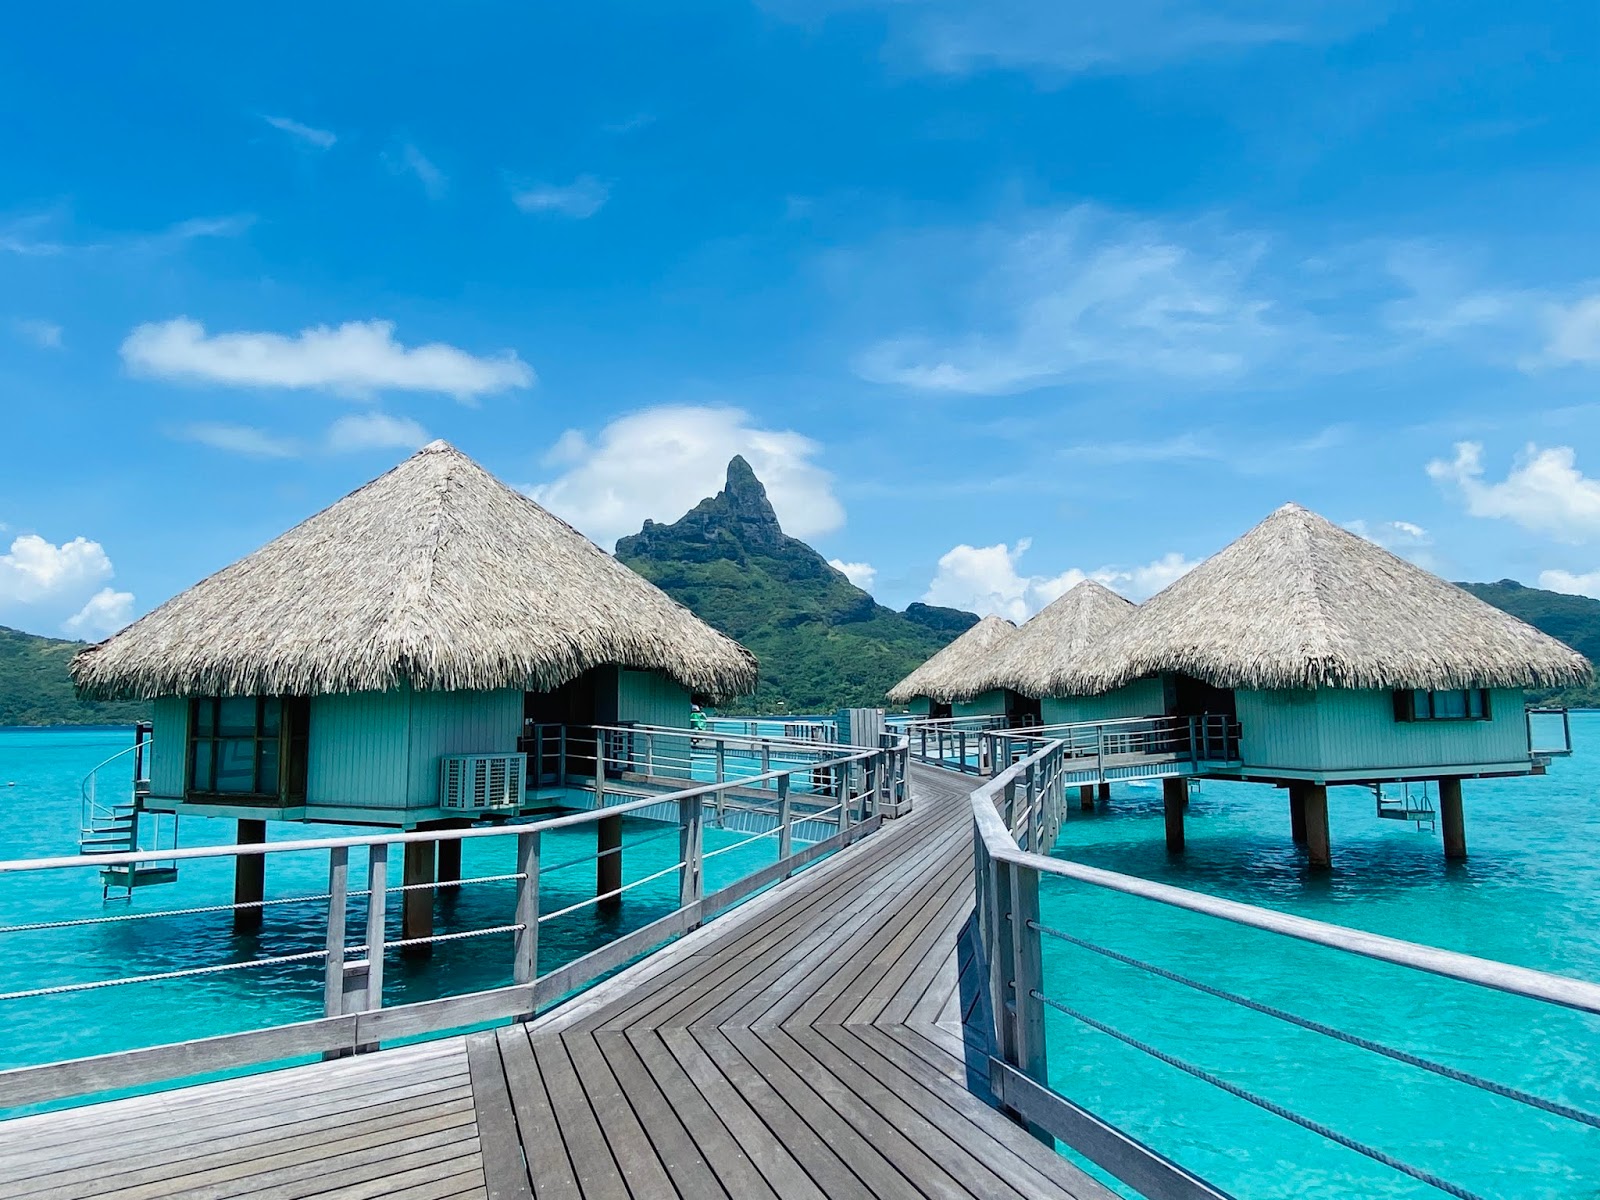 Review All Things About Booking Le Meridien Bora Bora On Points For ...